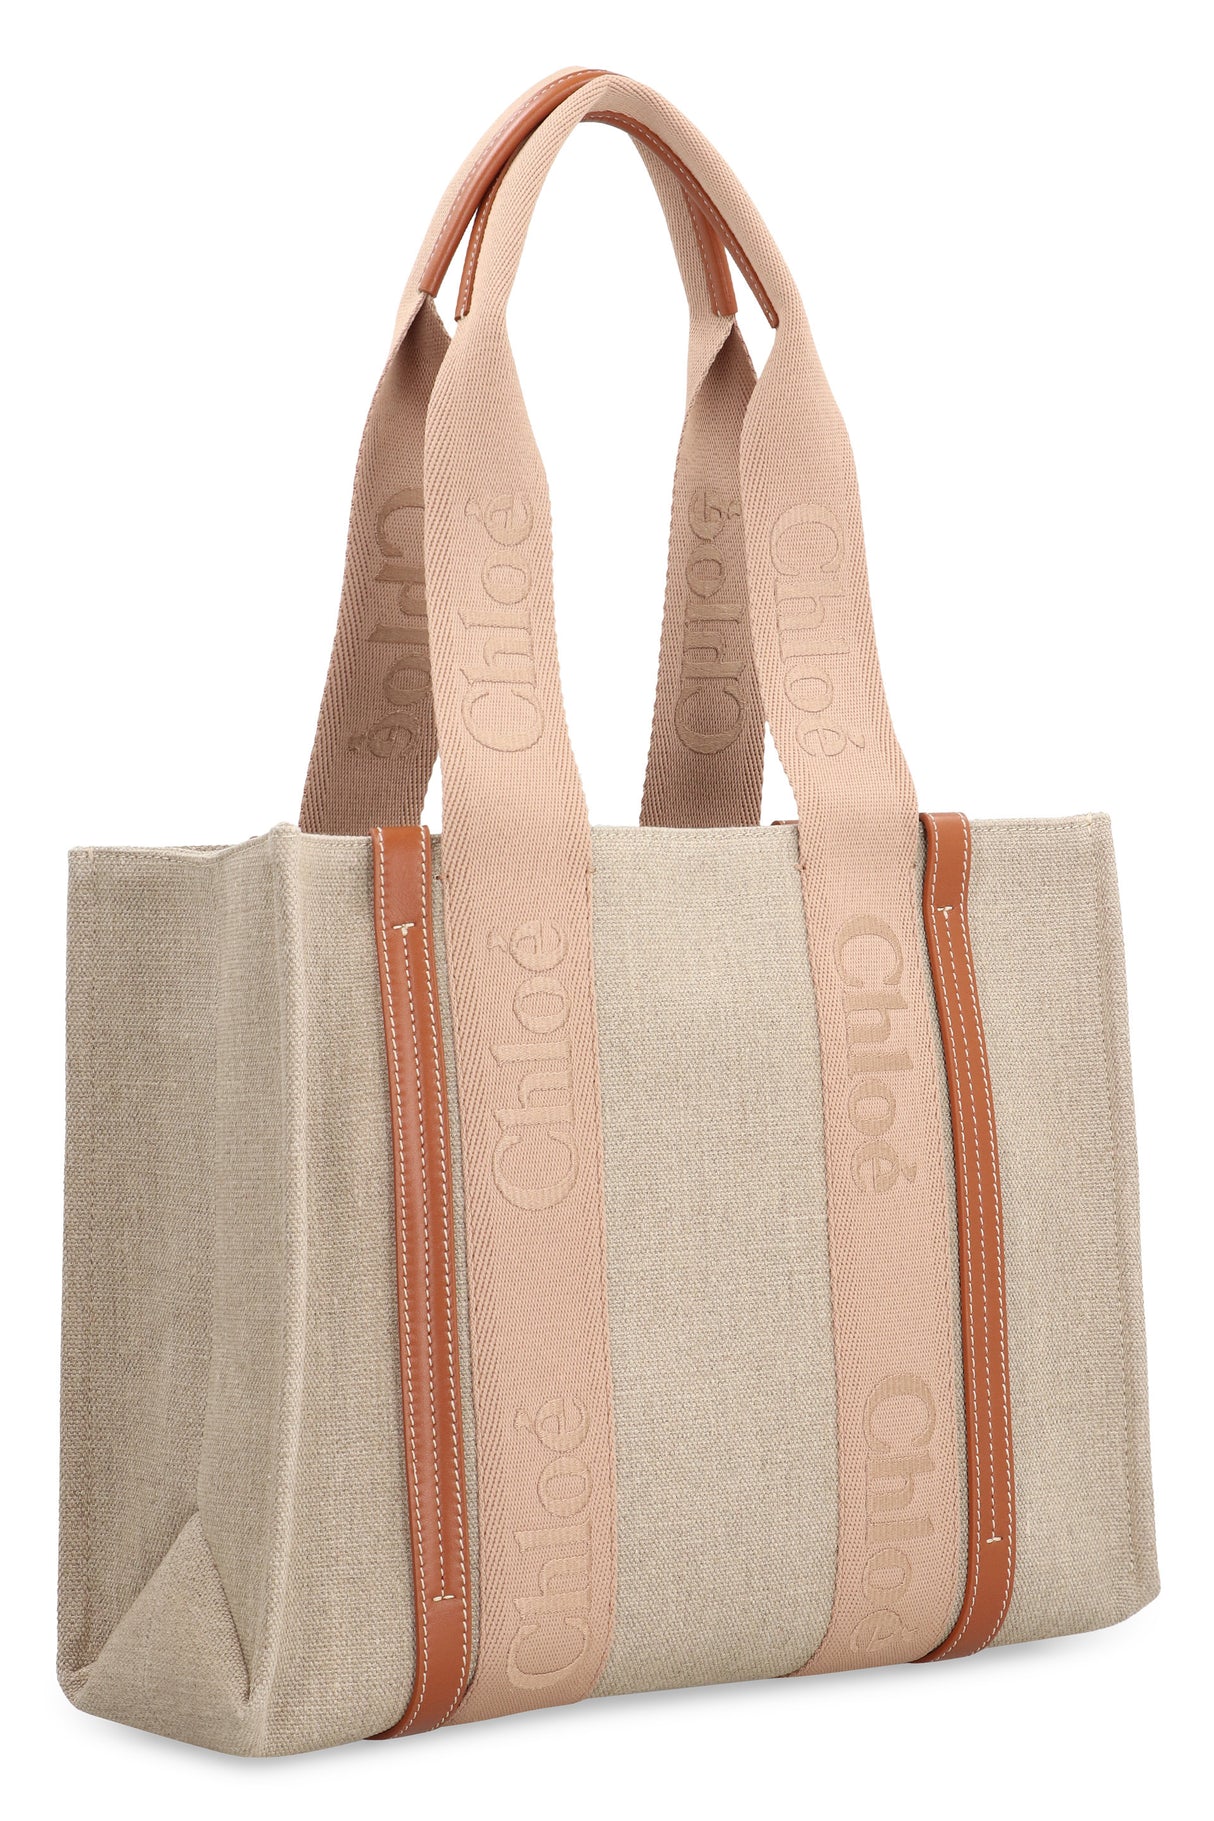 CHLOÉ Beige Canvas Tote Handbag for Women - SS24 Collection